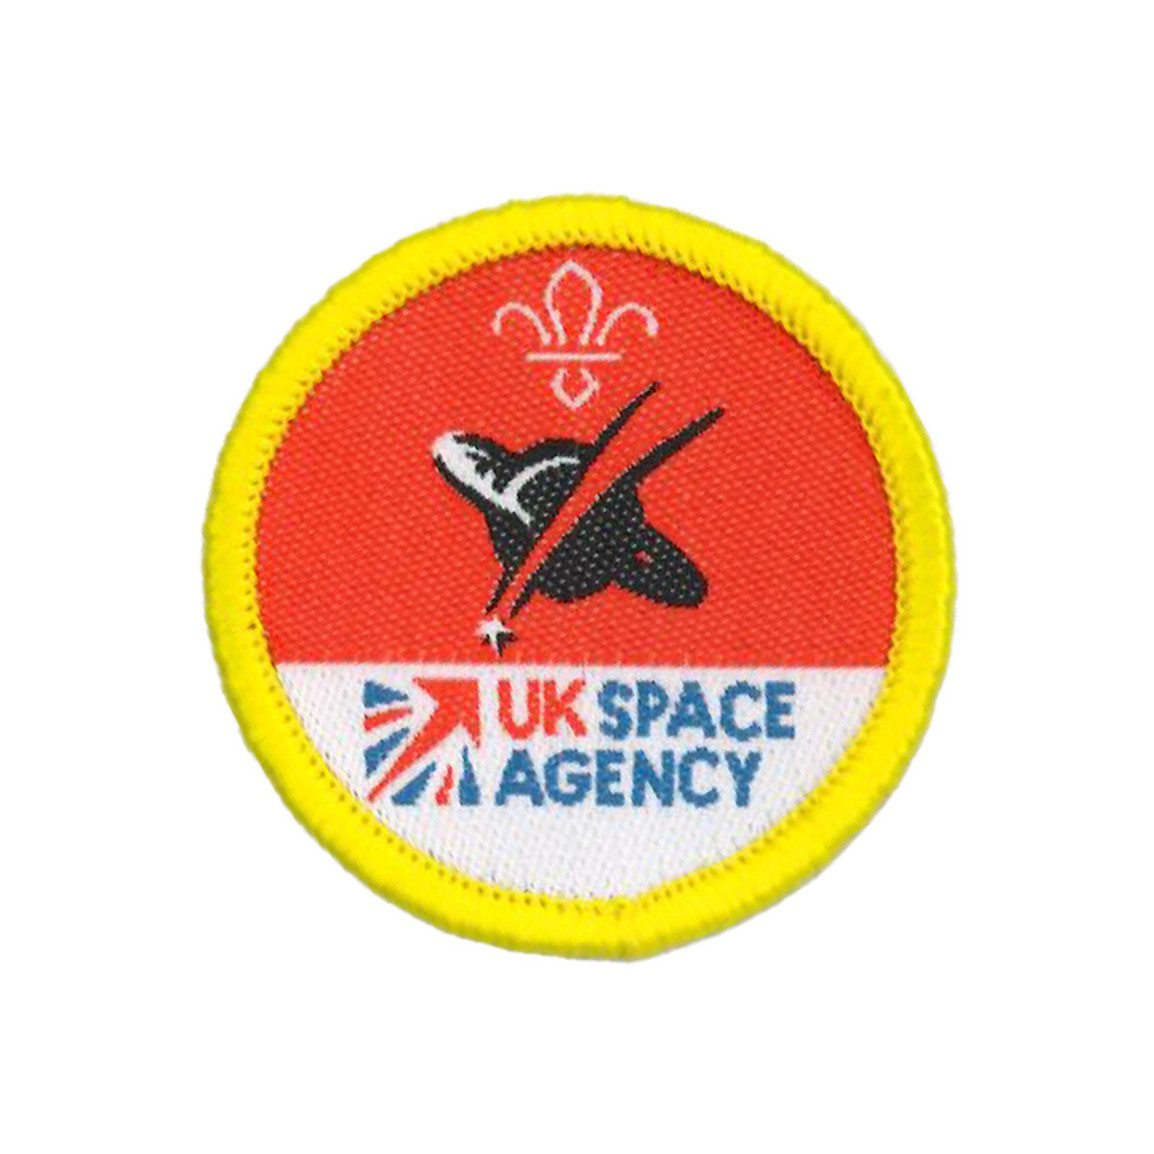 Cub Scout Astronomer Activity Badge (UK Space Agency)